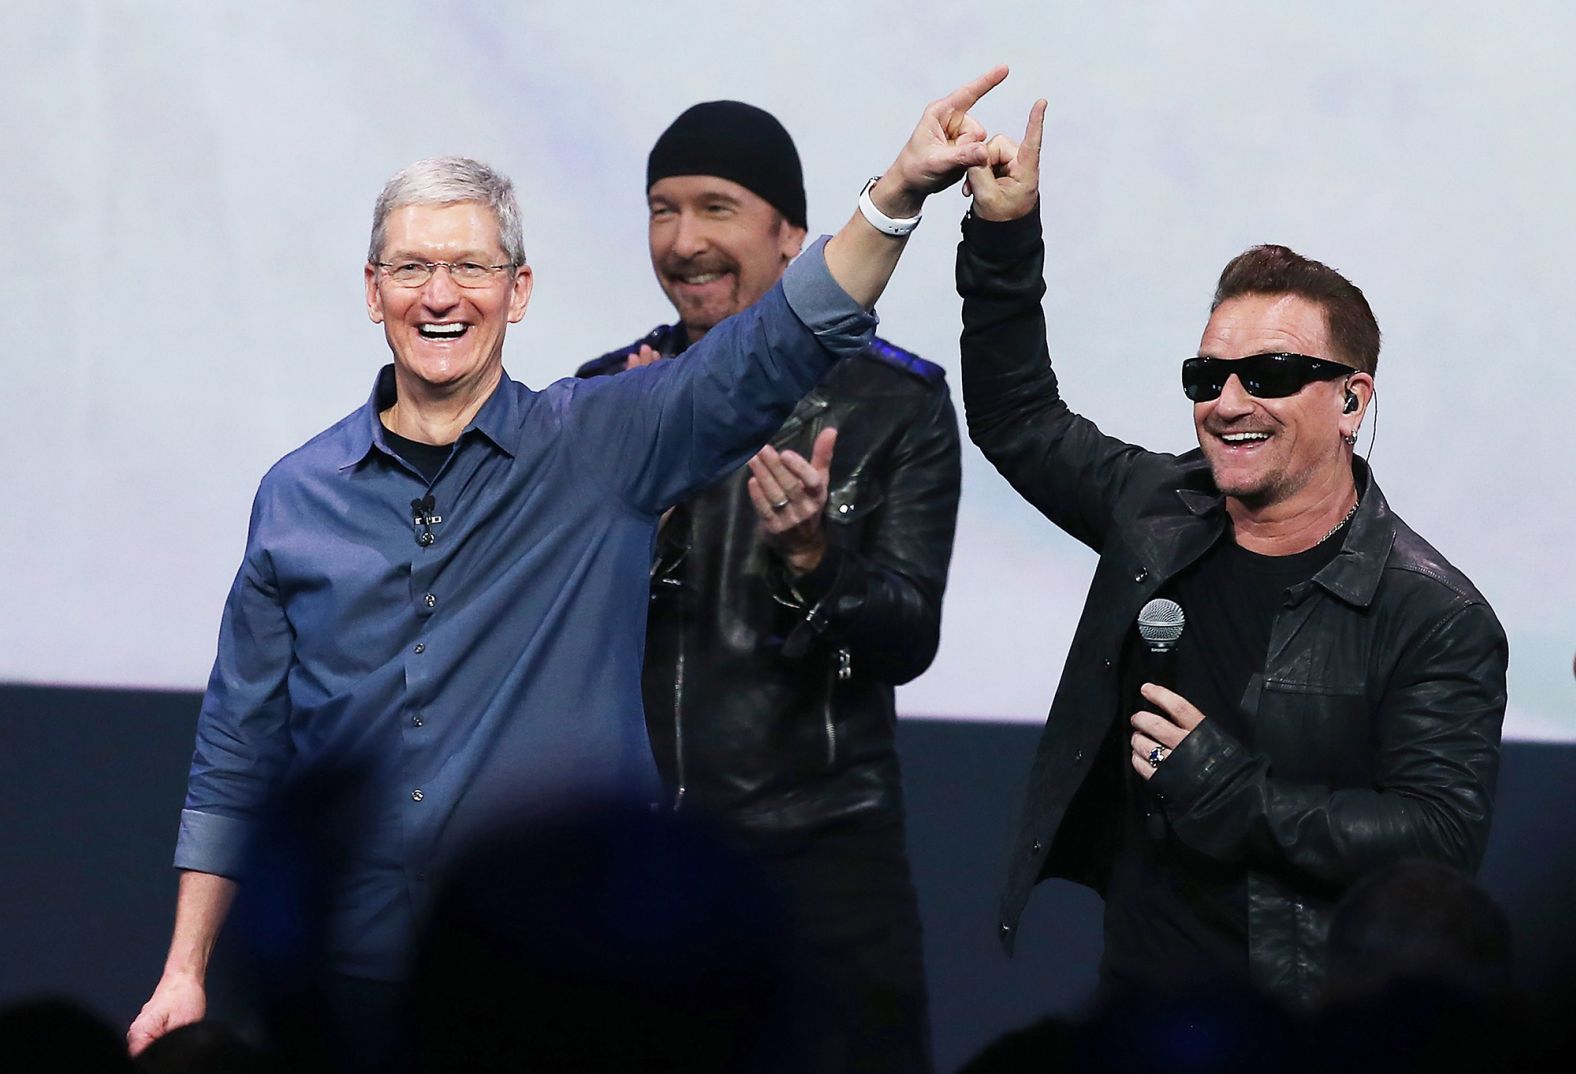 Cook greets the crowd with U2 singer Bono as U2 guitarist The Edge looks on during an Apple special event at the Flint Center for the Performing Arts in Cupertino in September 2014.